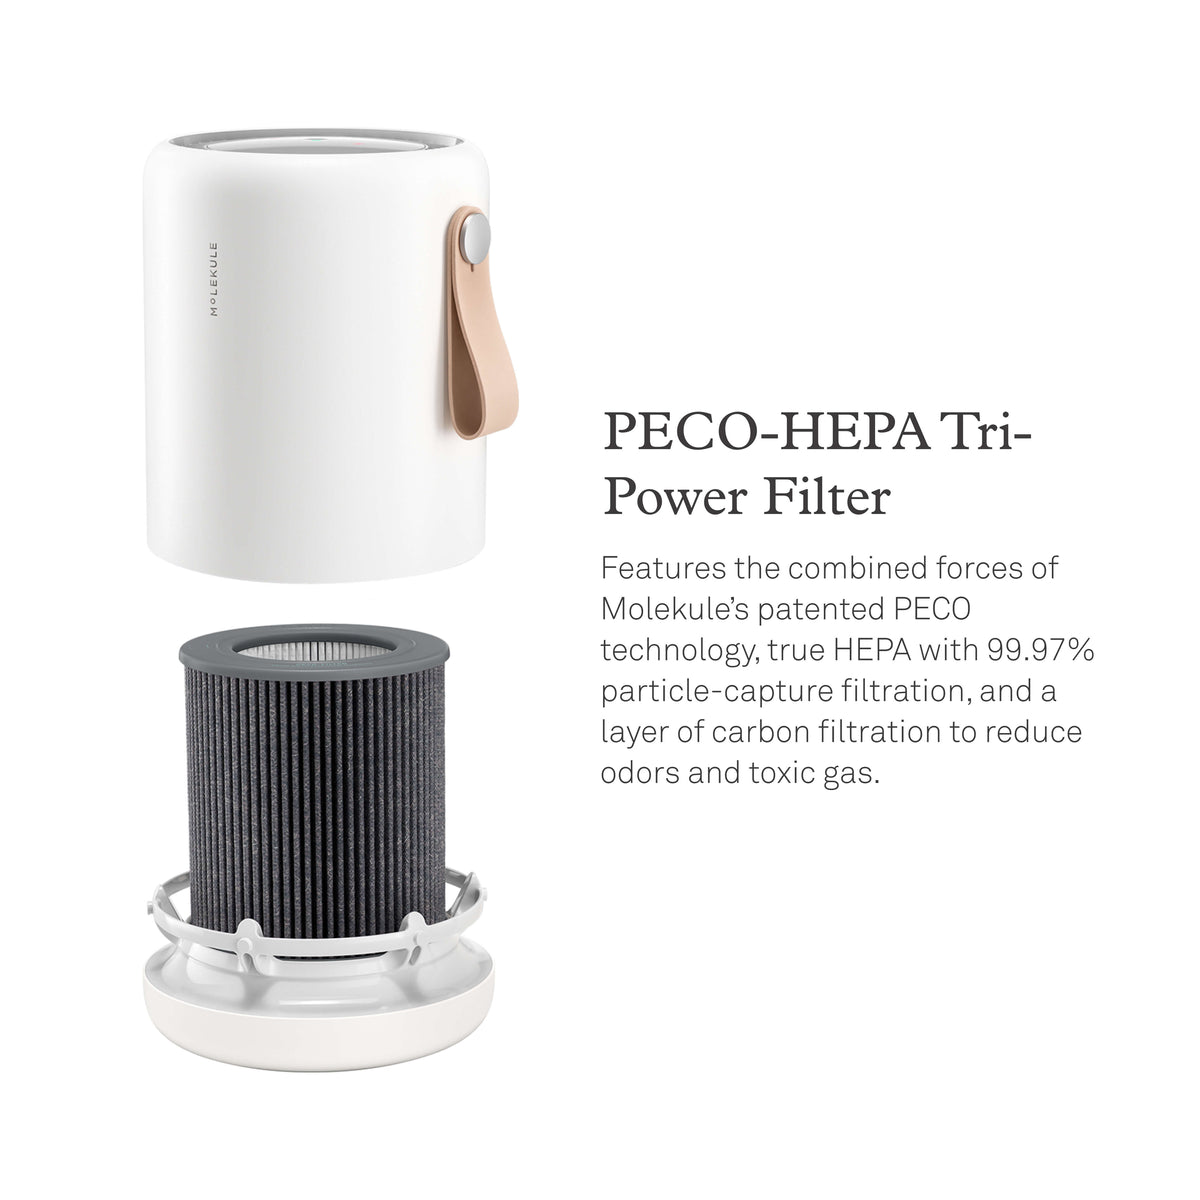 Molekule Air Mini air purifier and replacement filter. PECO-HEPA Tri-Power Filter. Features the combined forces of Molekule’s patented PECO technology, true HEPA with 99.97% particle-capture filtration, and a layer of carbon filtration to reduce odors and toxic gas.